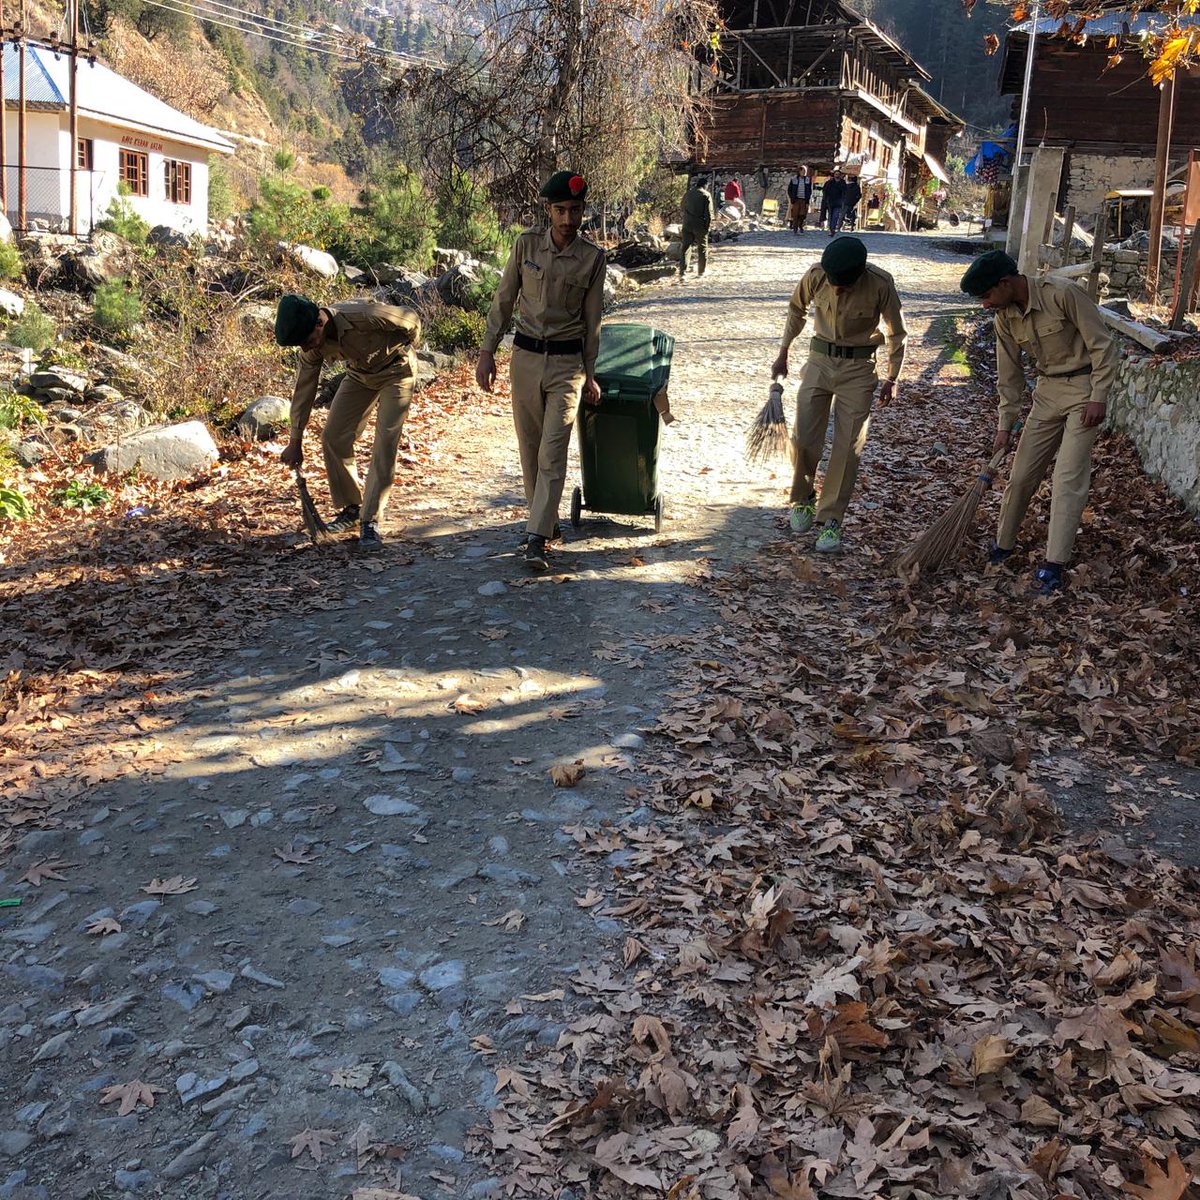 SwachathaPakhwada, #IndianArmy conducted a #cleanlinessdrive along with NCC cadets and locals of Keran village, aimed to promoting hygiene and community responsibility. Activities included waste collection, awareness programs and workshops.
#BadaltaKashmir 
#FridayMotivation